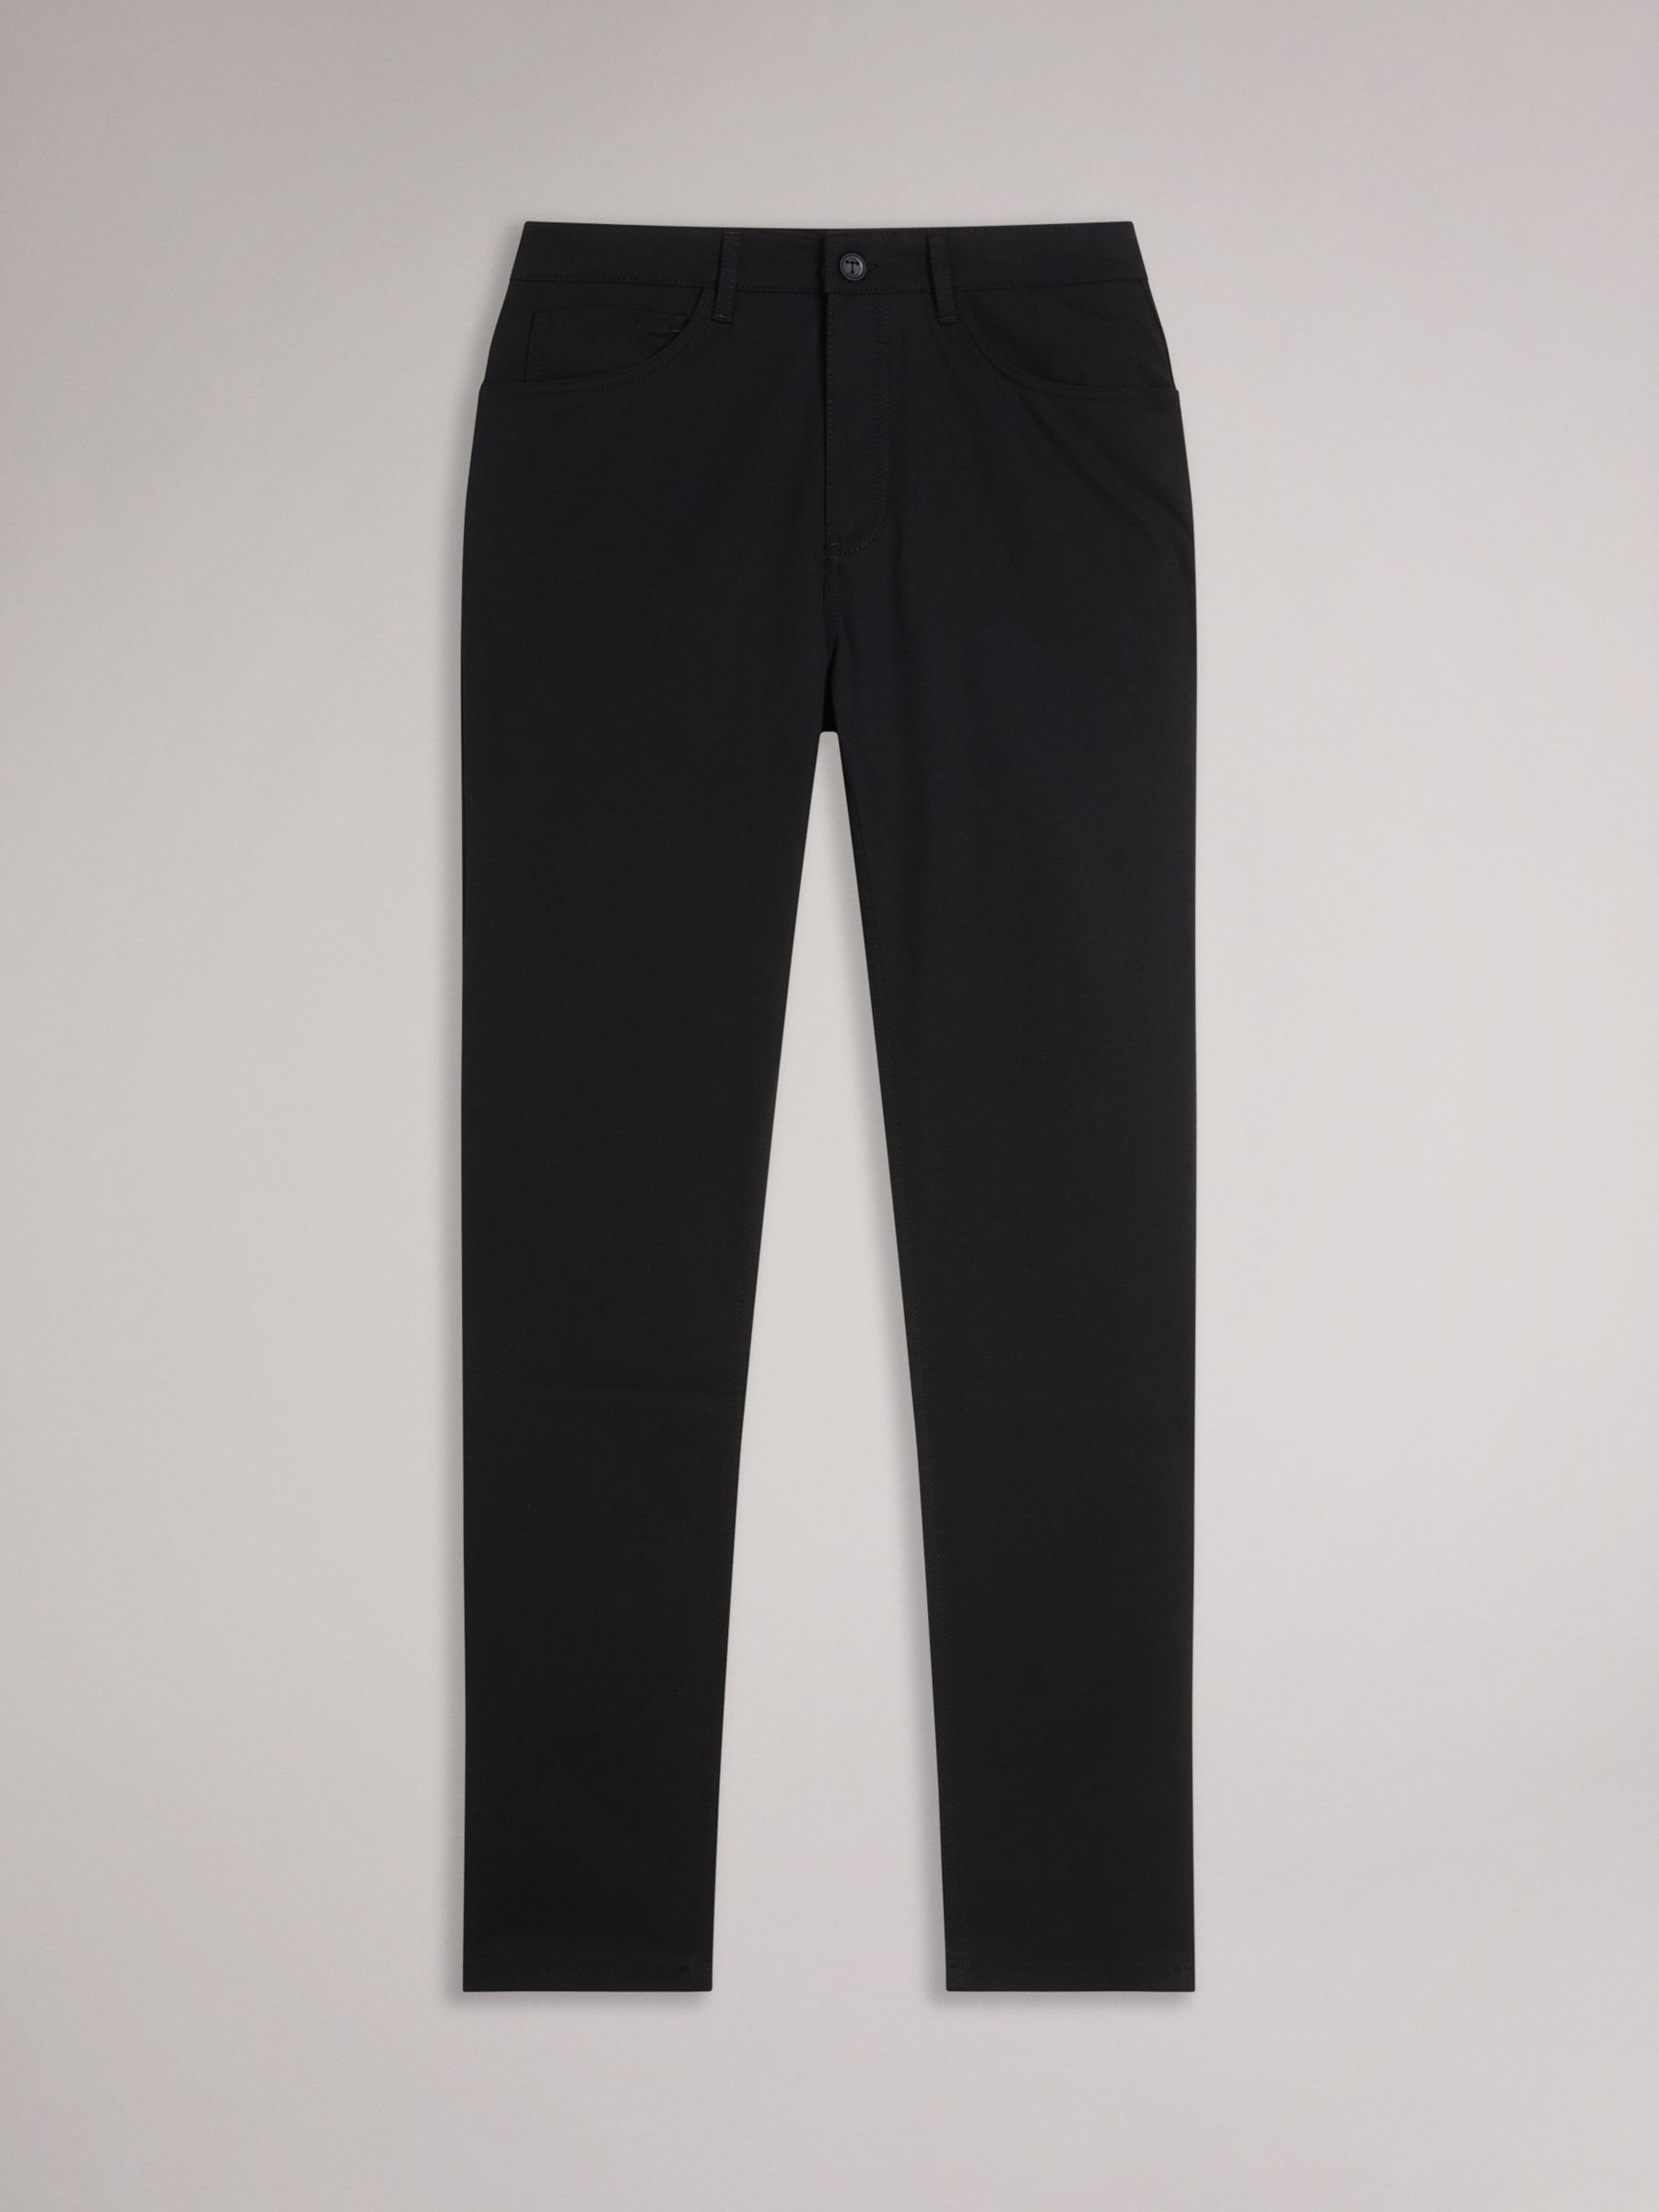 Ted Baker Mansurt Twill Trousers, Black at John Lewis & Partners